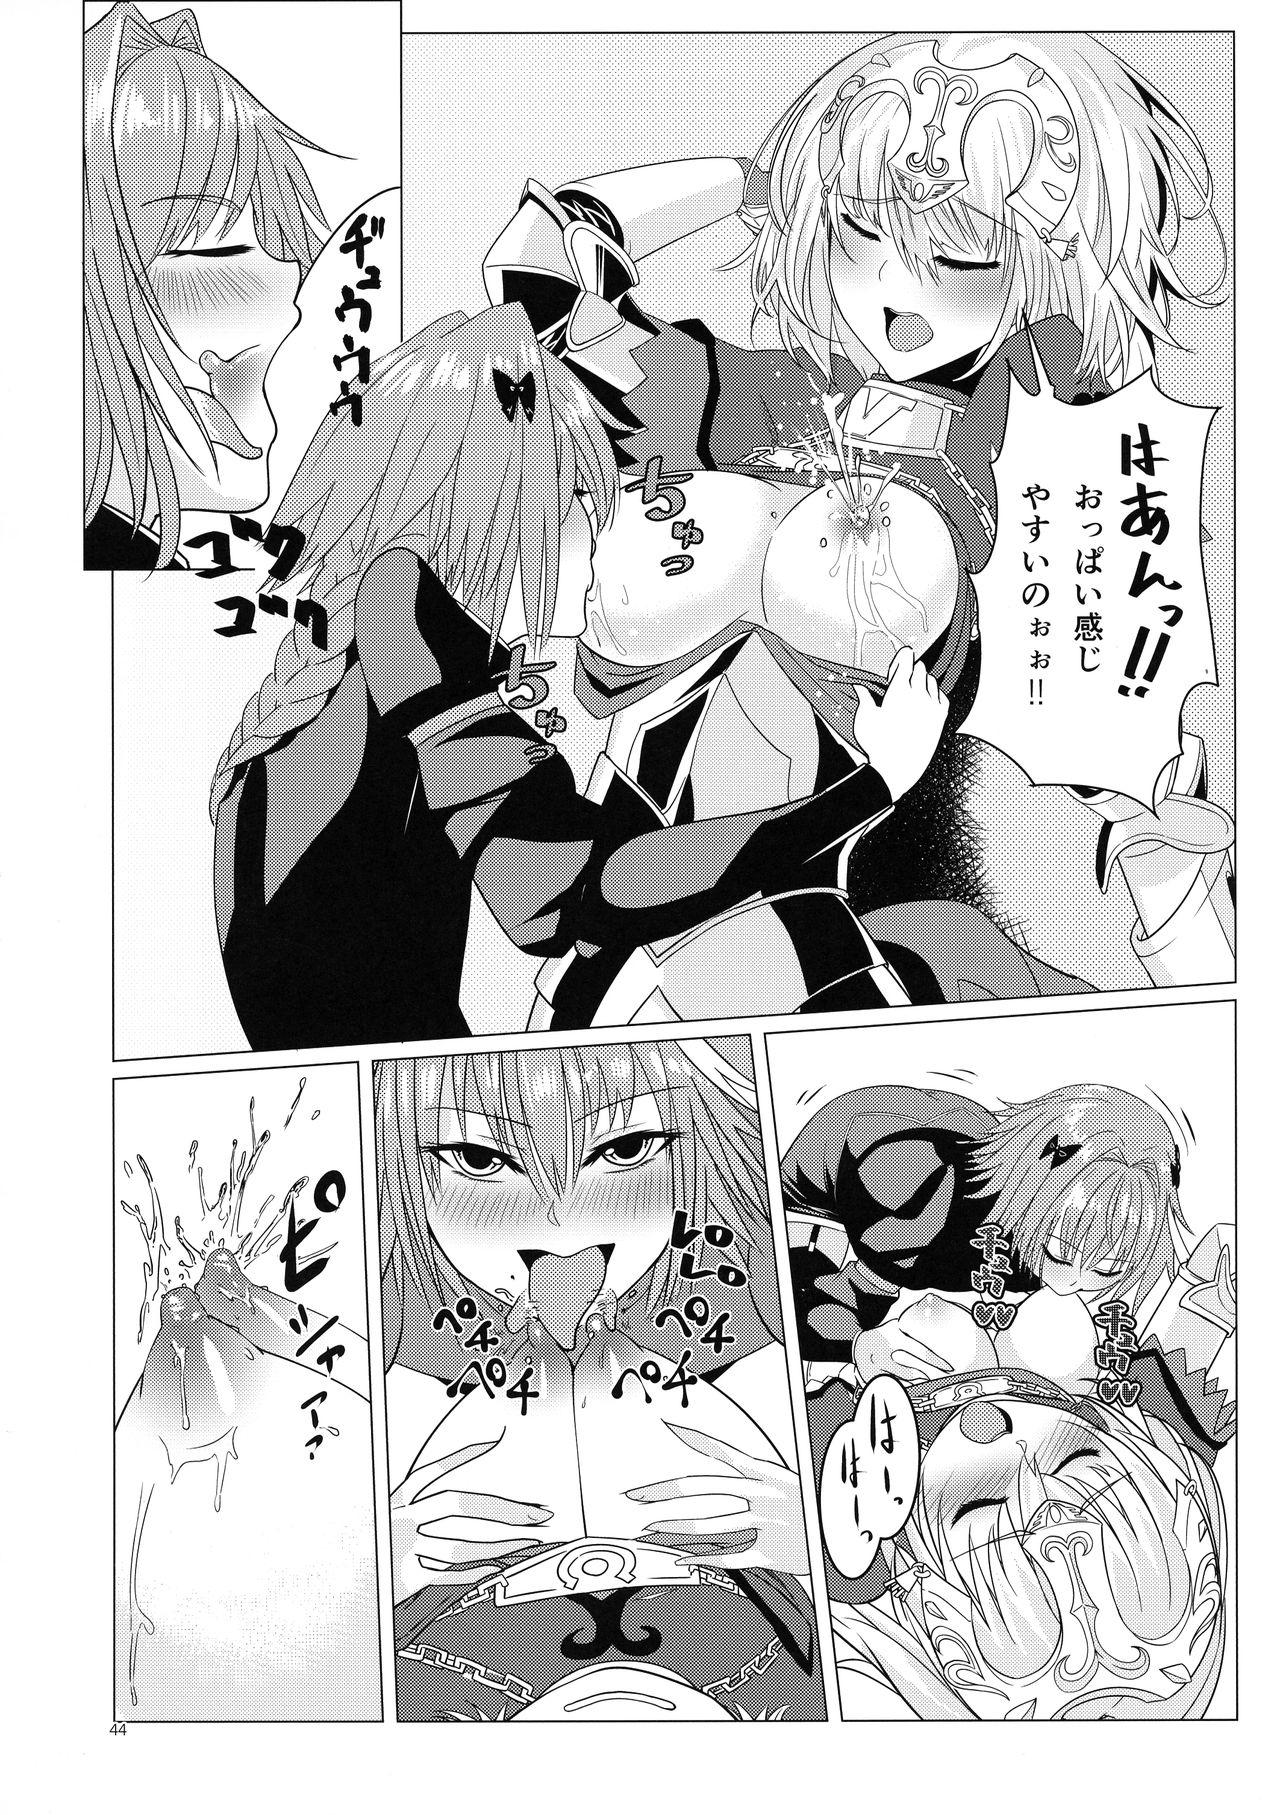 Matching Spirits - Jeanne and Astolfo have sex 41